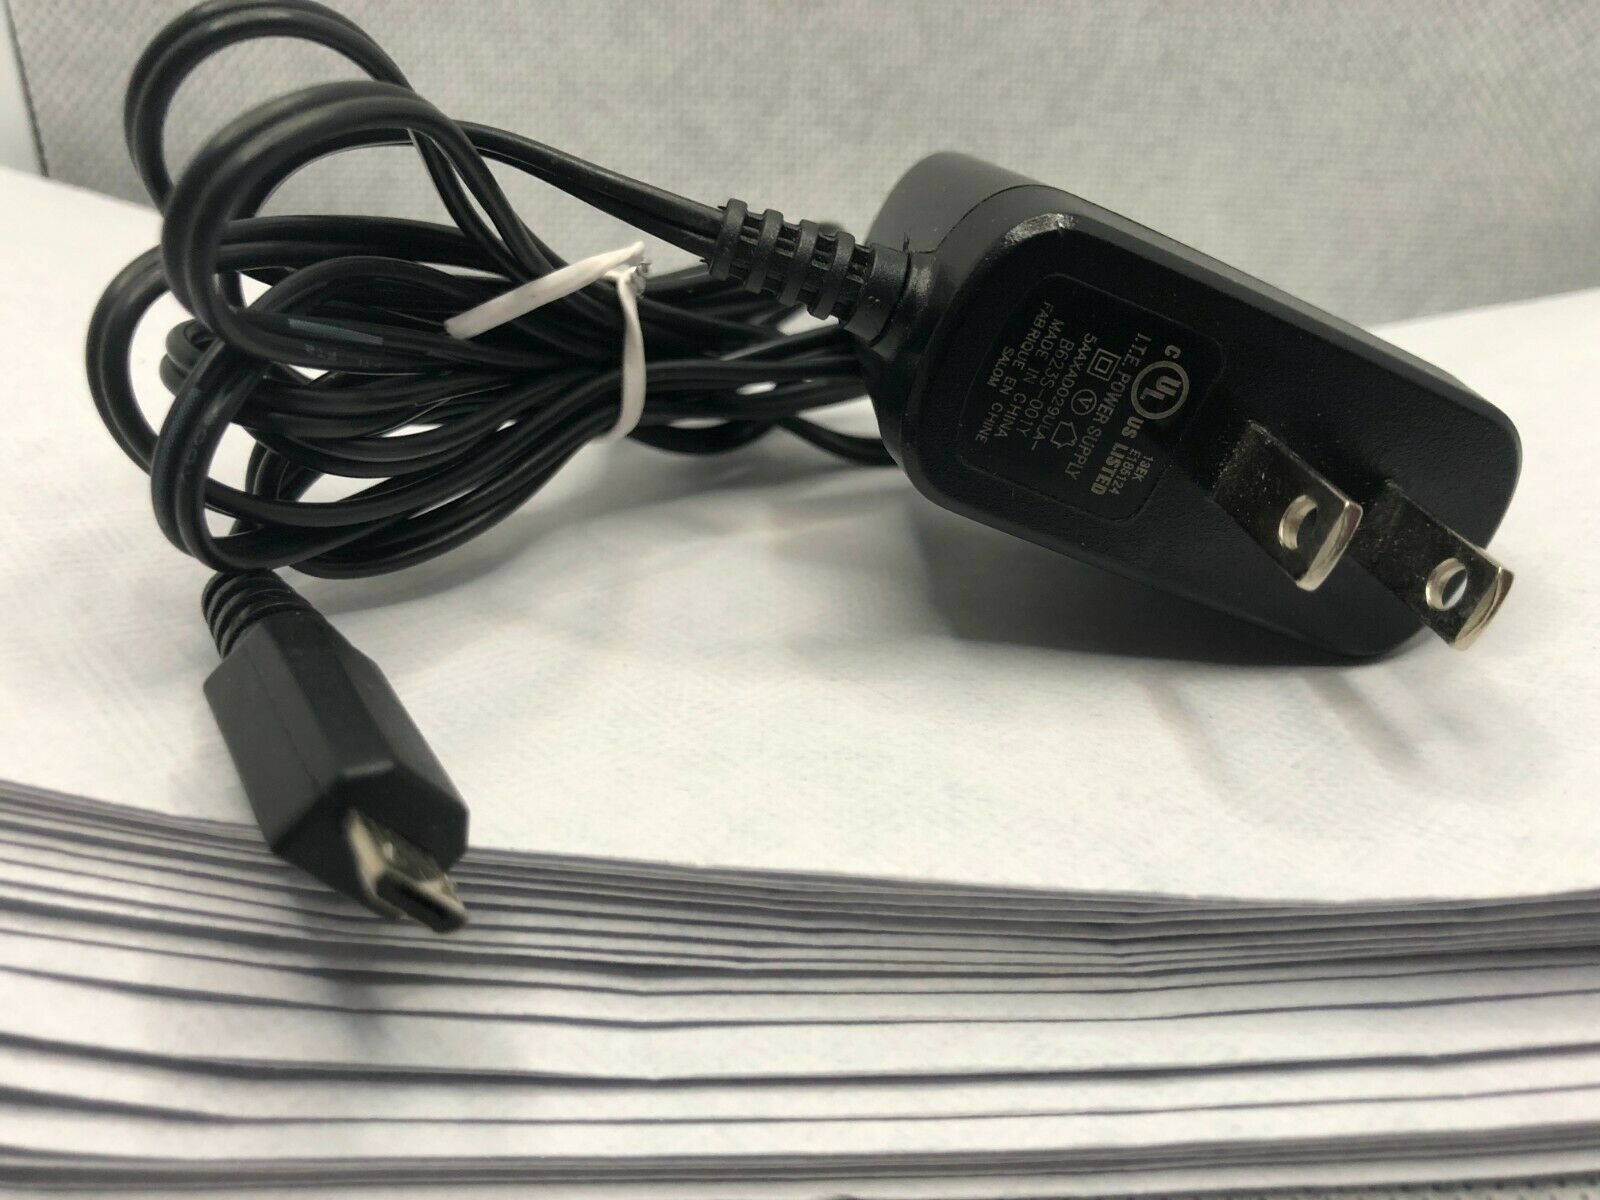 Keyocera AC Adapter SCP-31ADT Power Supply 5v 800mah Type: AC to DC Adapter MPN: Does Not Apply Model: AC Adapter